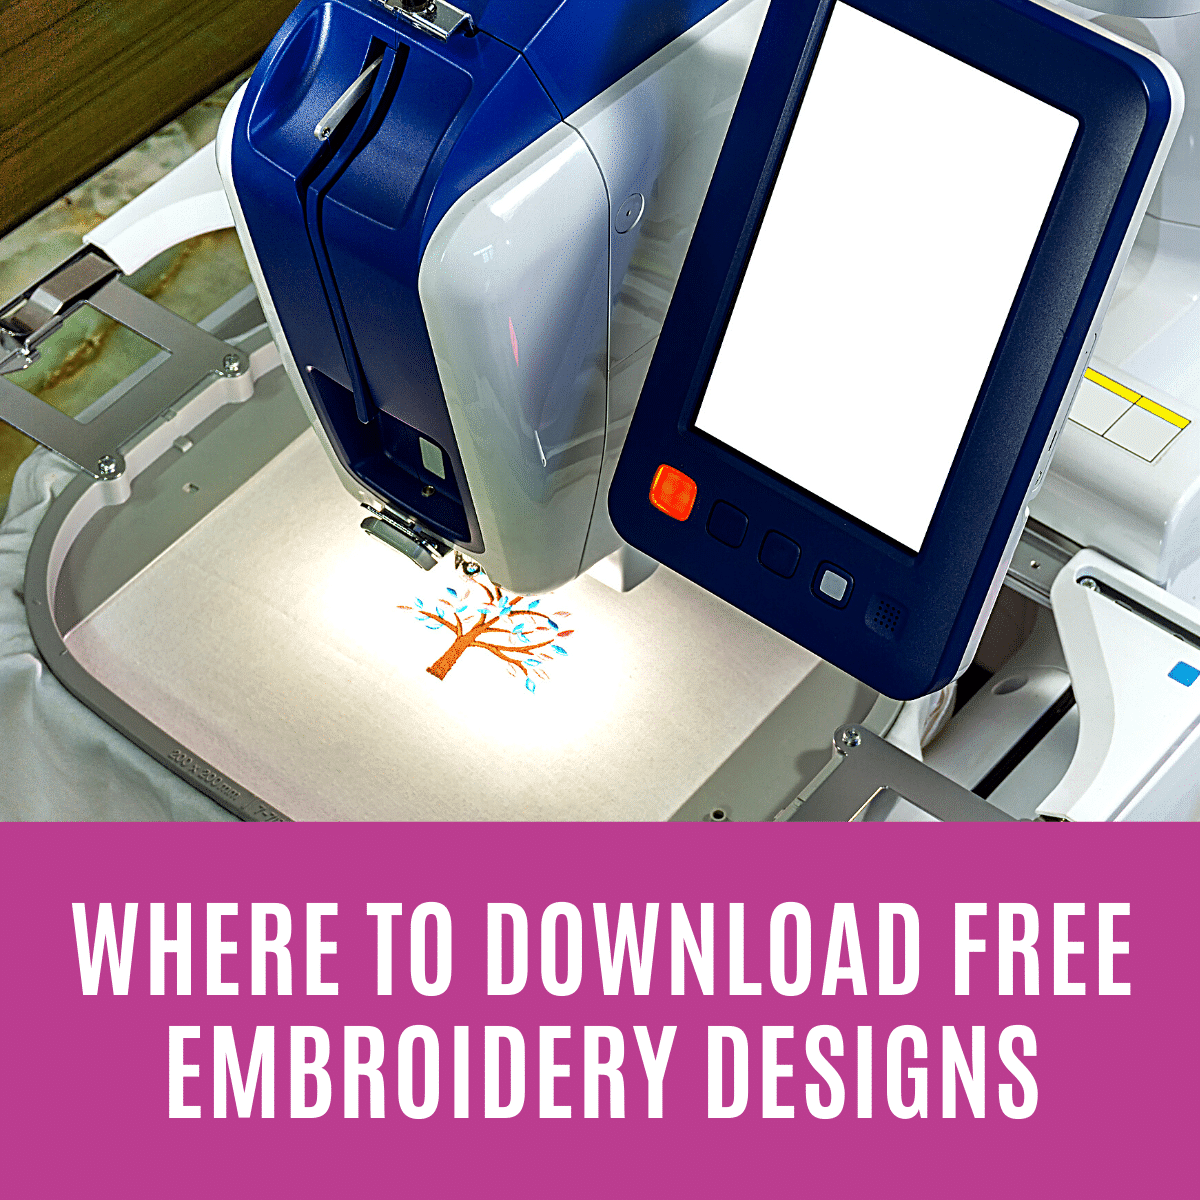 Embroidery machine Designs to download